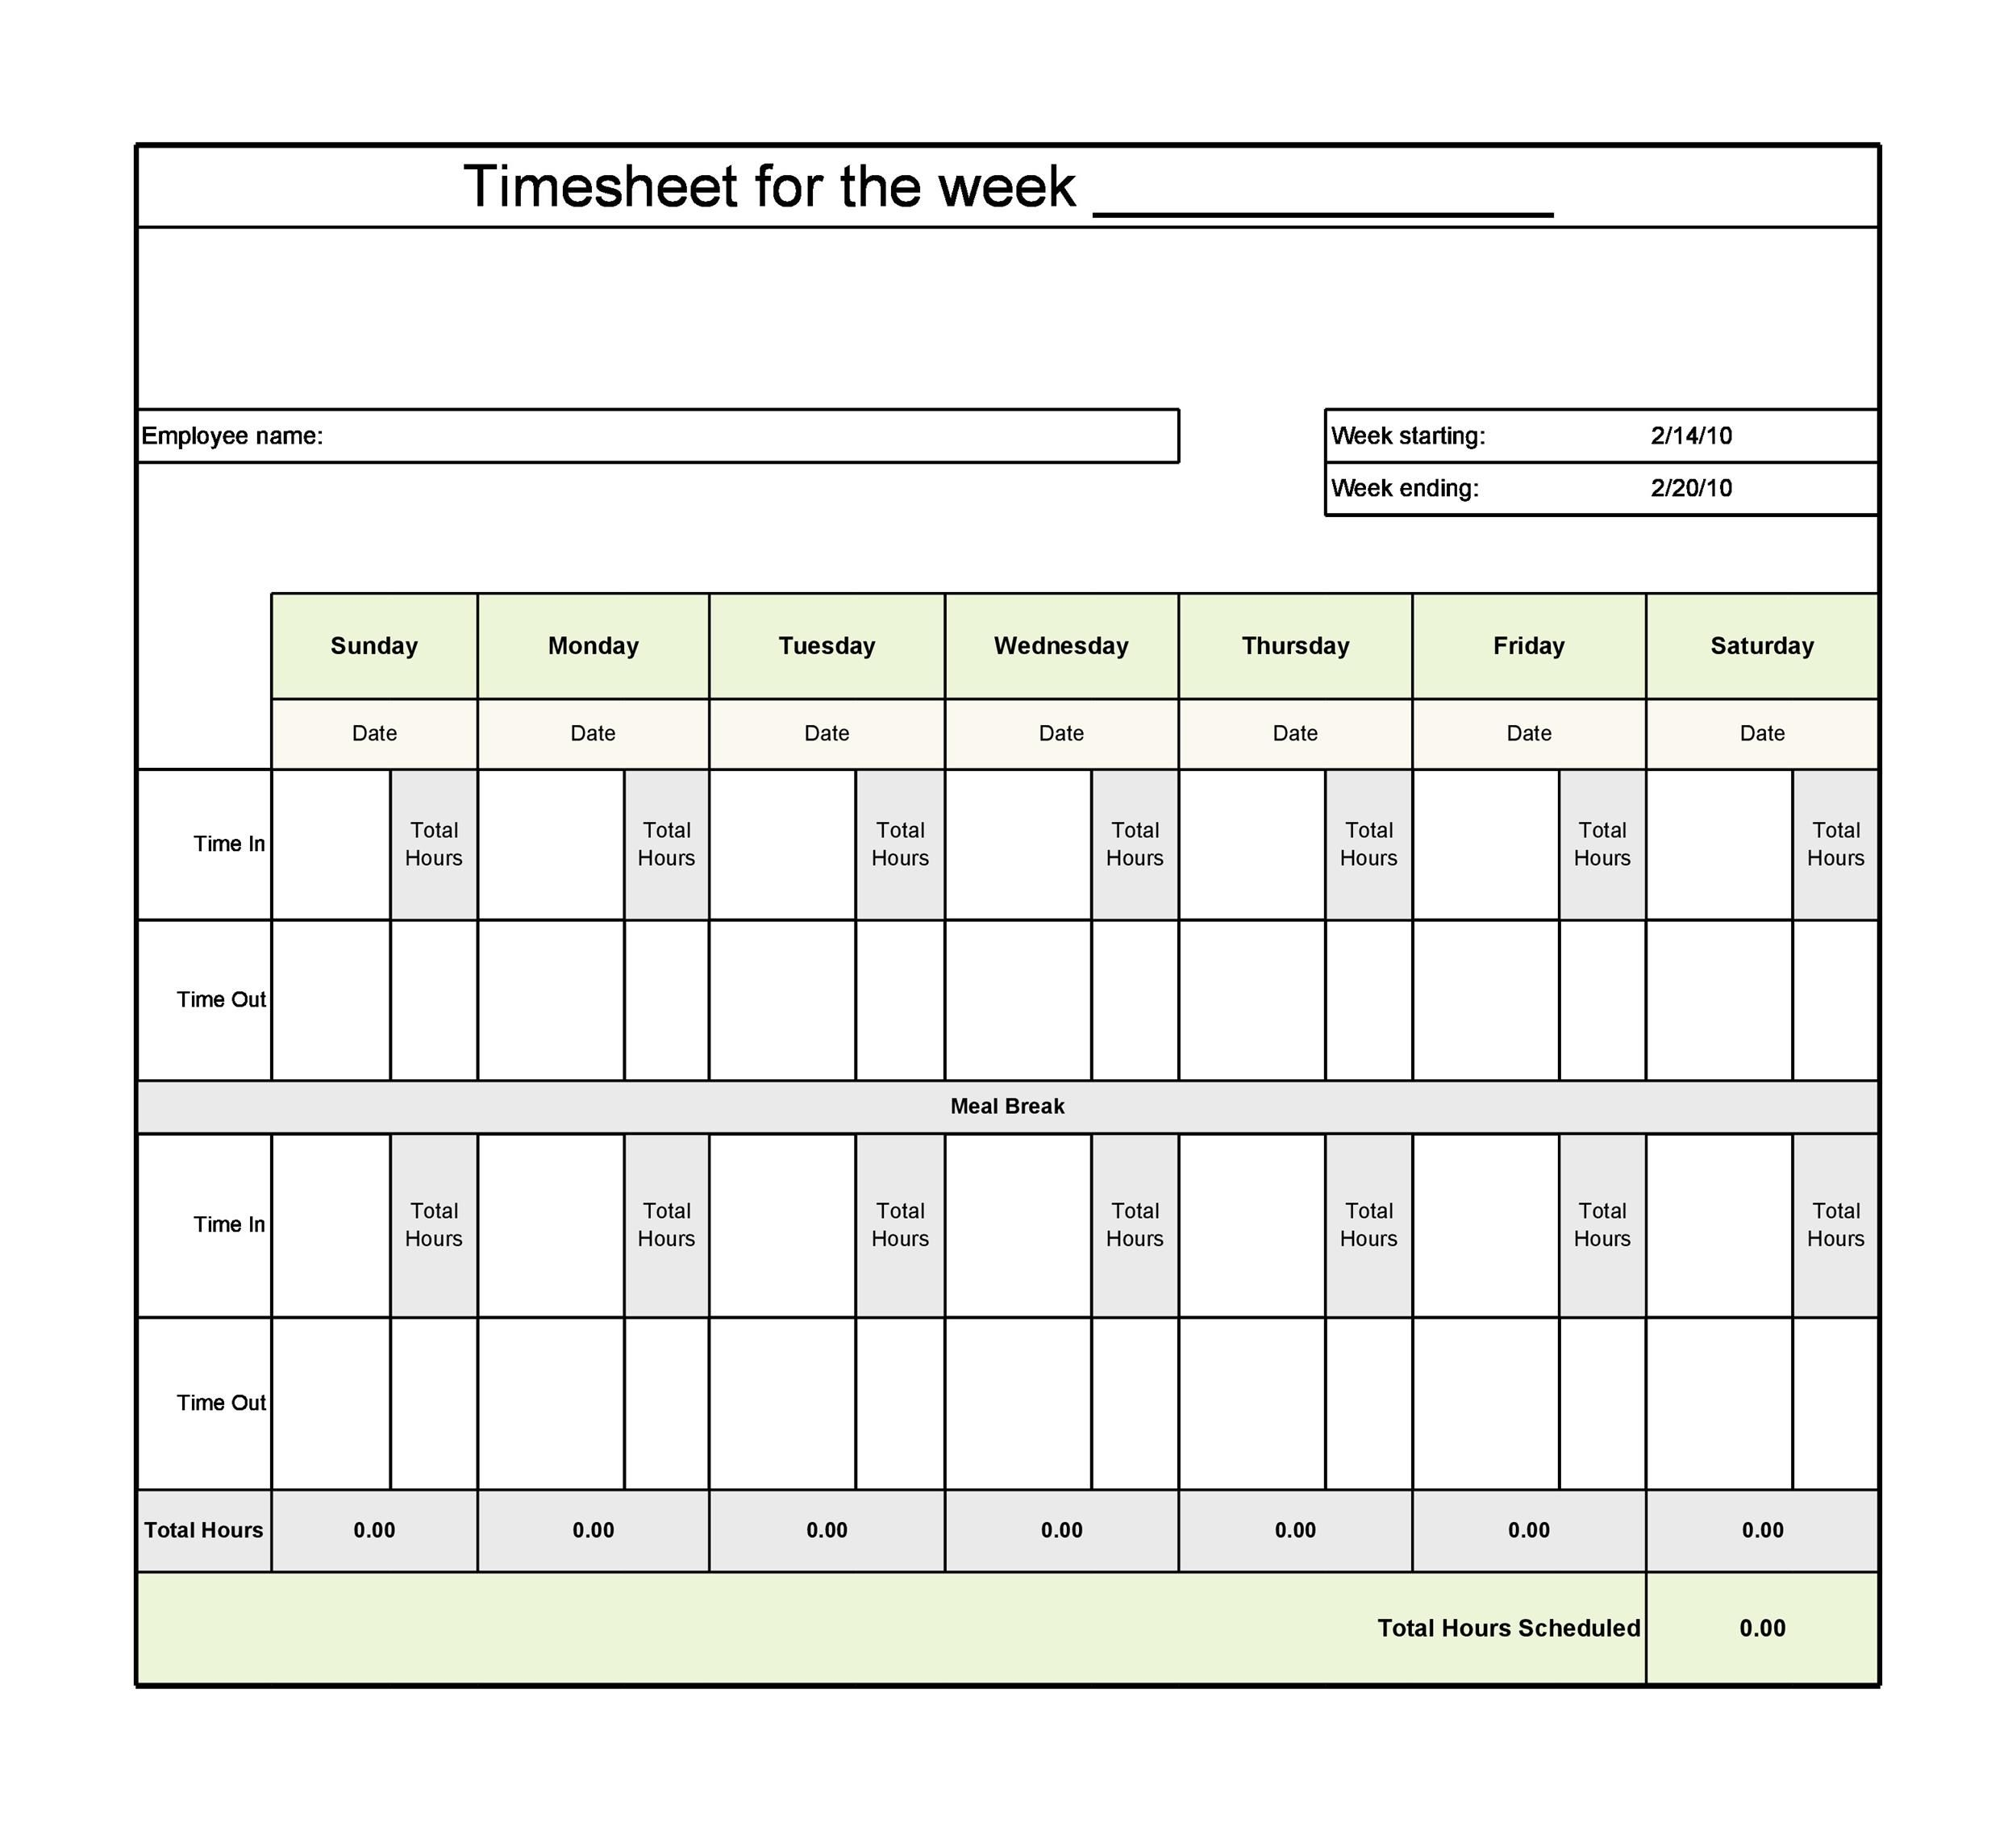 40 Free Timesheet Templates [In Excel] ᐅ Templatelab